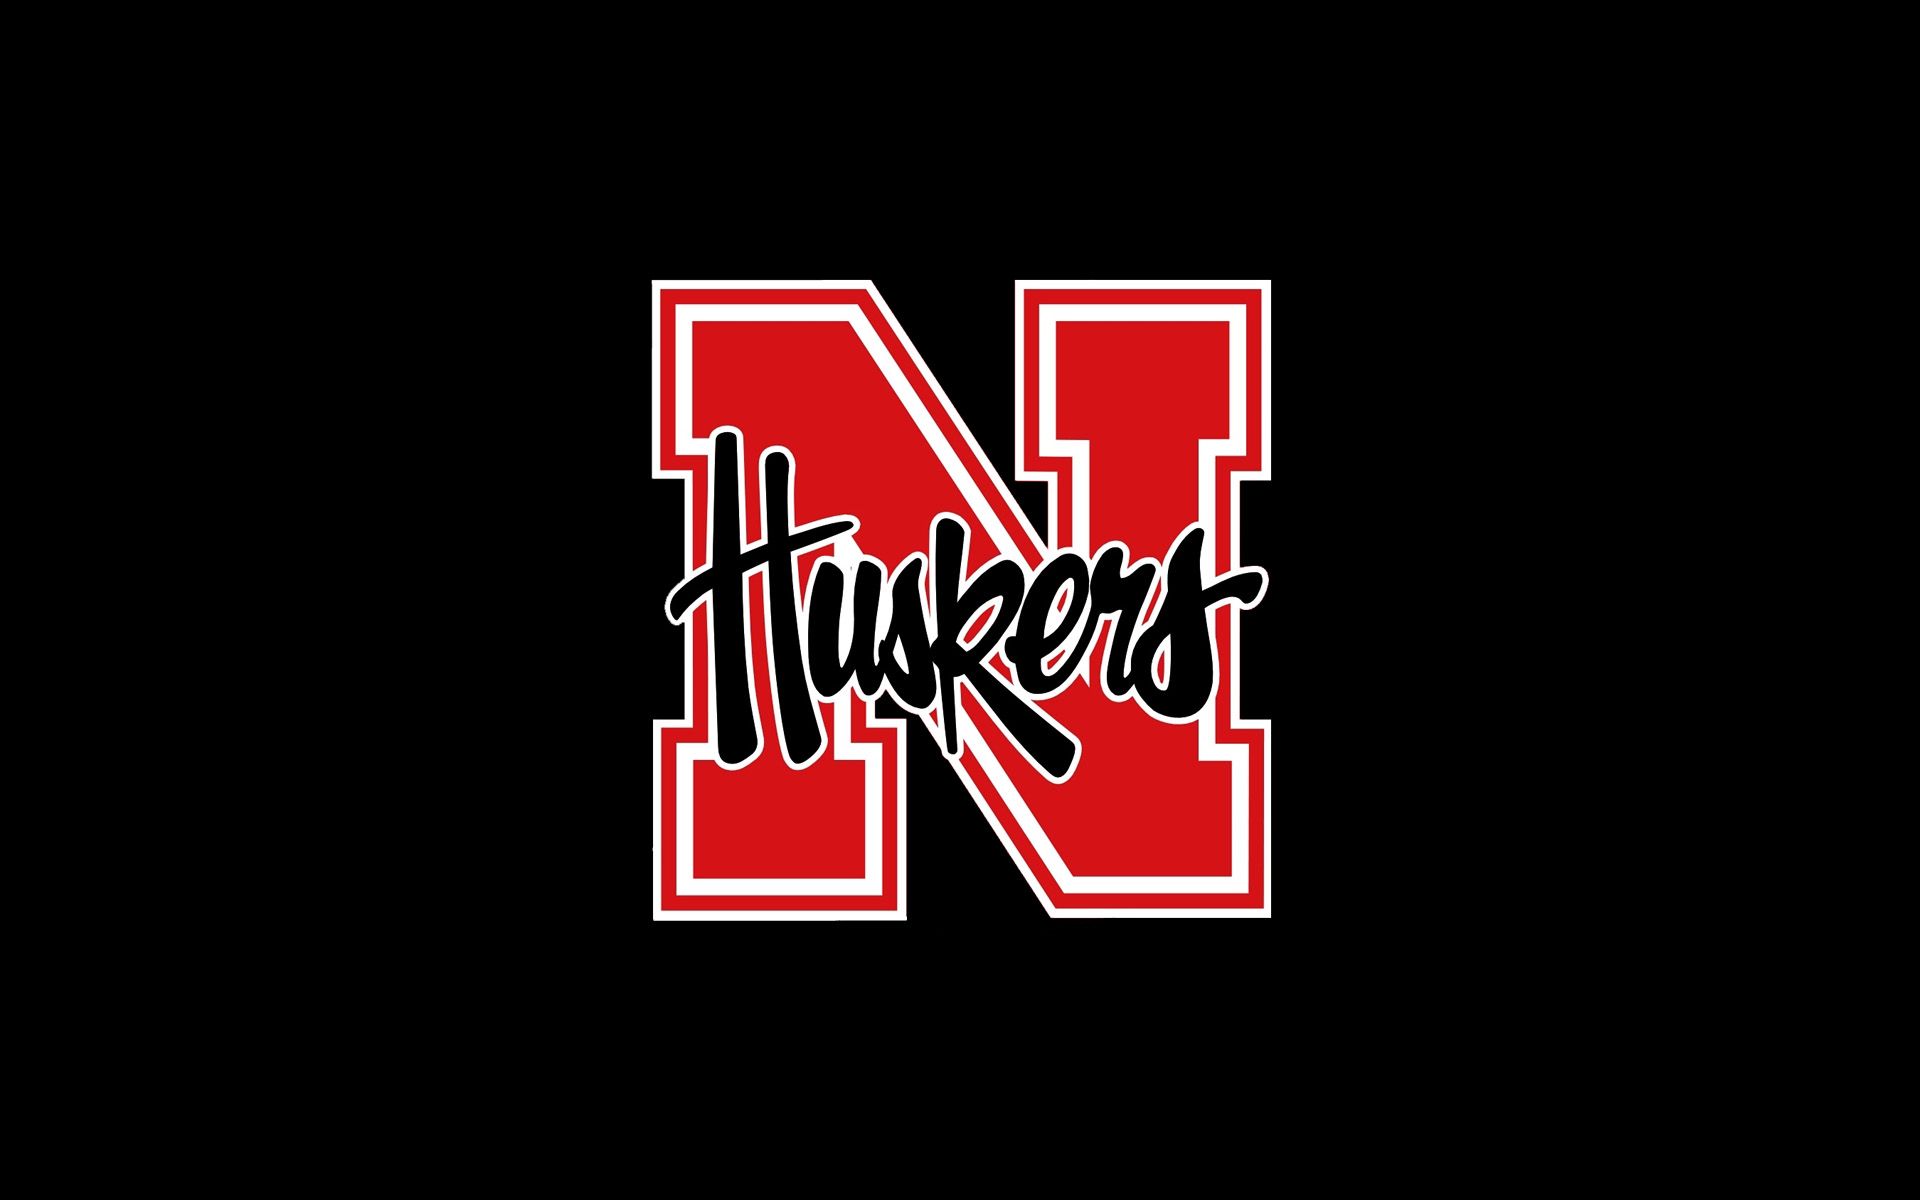 Pin Husker Wallpaper Picture